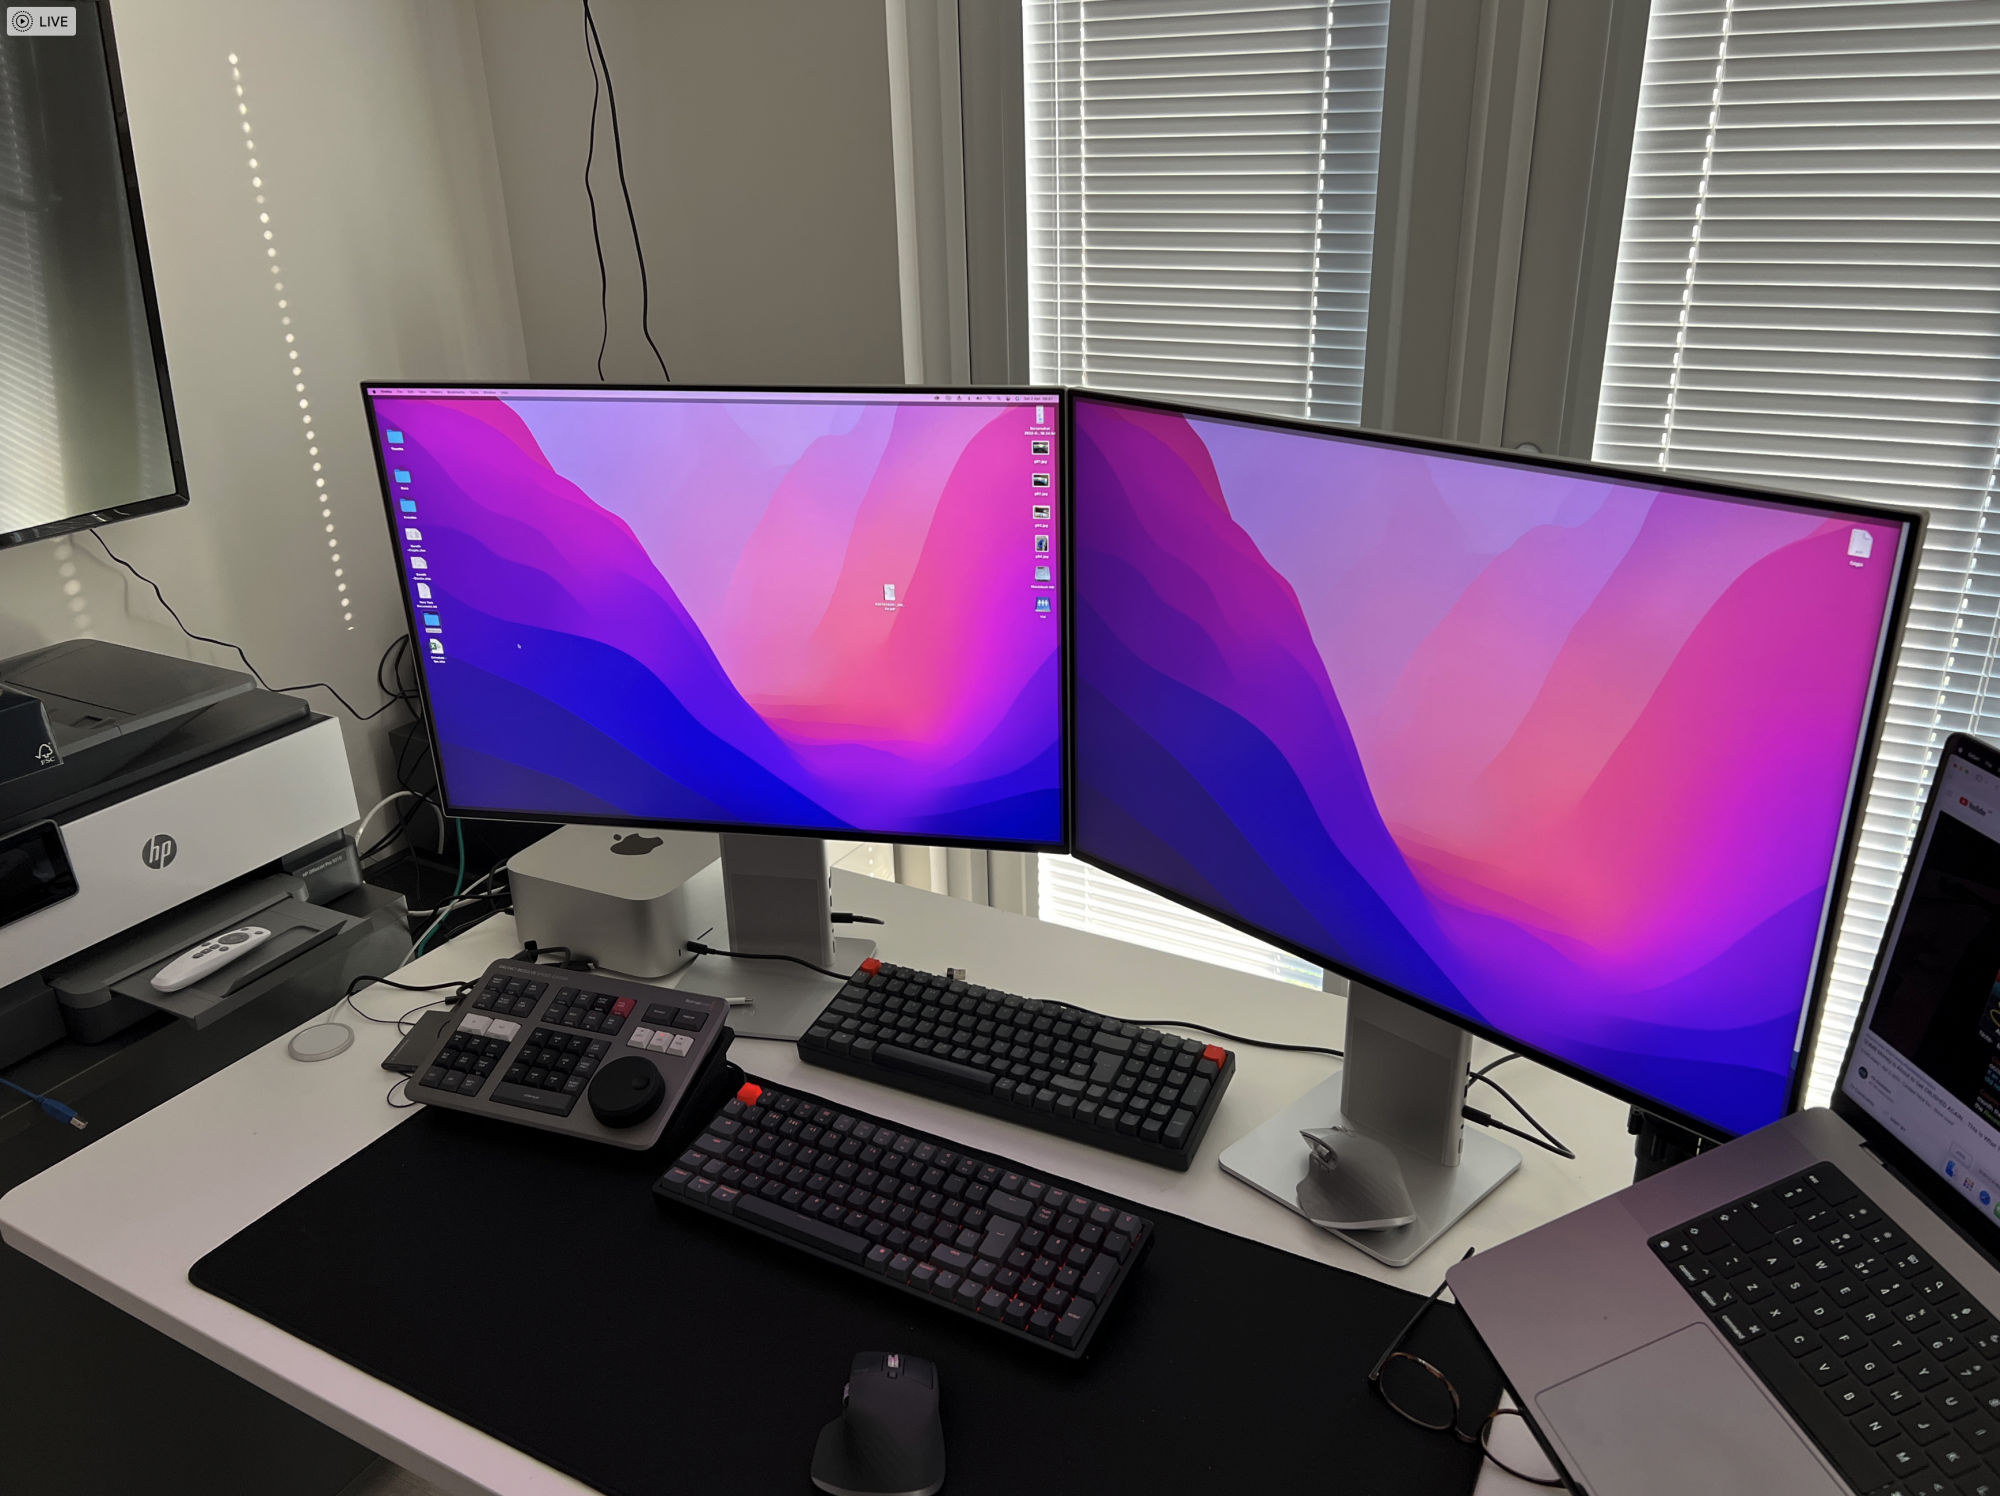 Just checking, still no way of getting 4K 120hz working in macOS on an  external monitor that only has HDMI? I have the 14” M1 Pro and an LG 48CX  and would